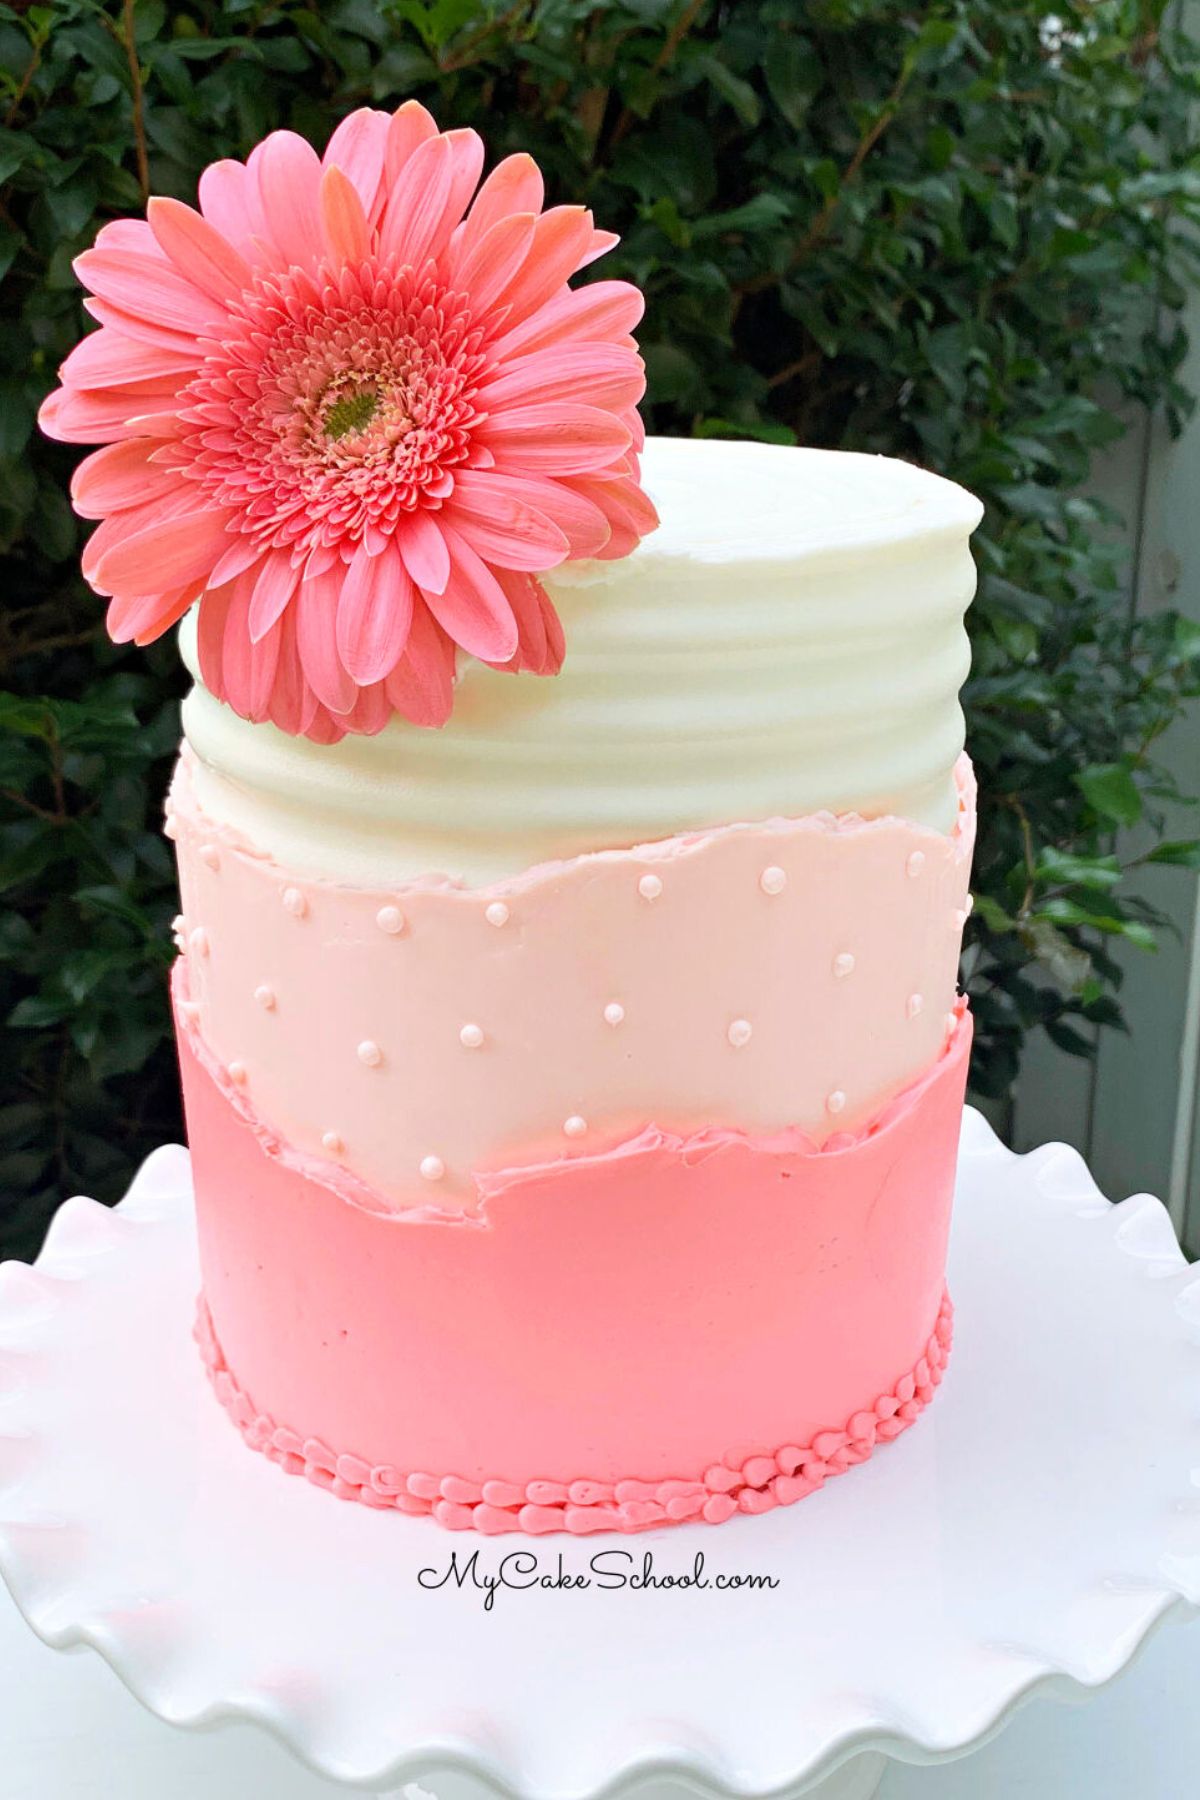 Combed white buttercream cake layered with peach layer of frosting and pink layer of frosting so that each layer of color is exposed.Topped with pink gerbera daisy.